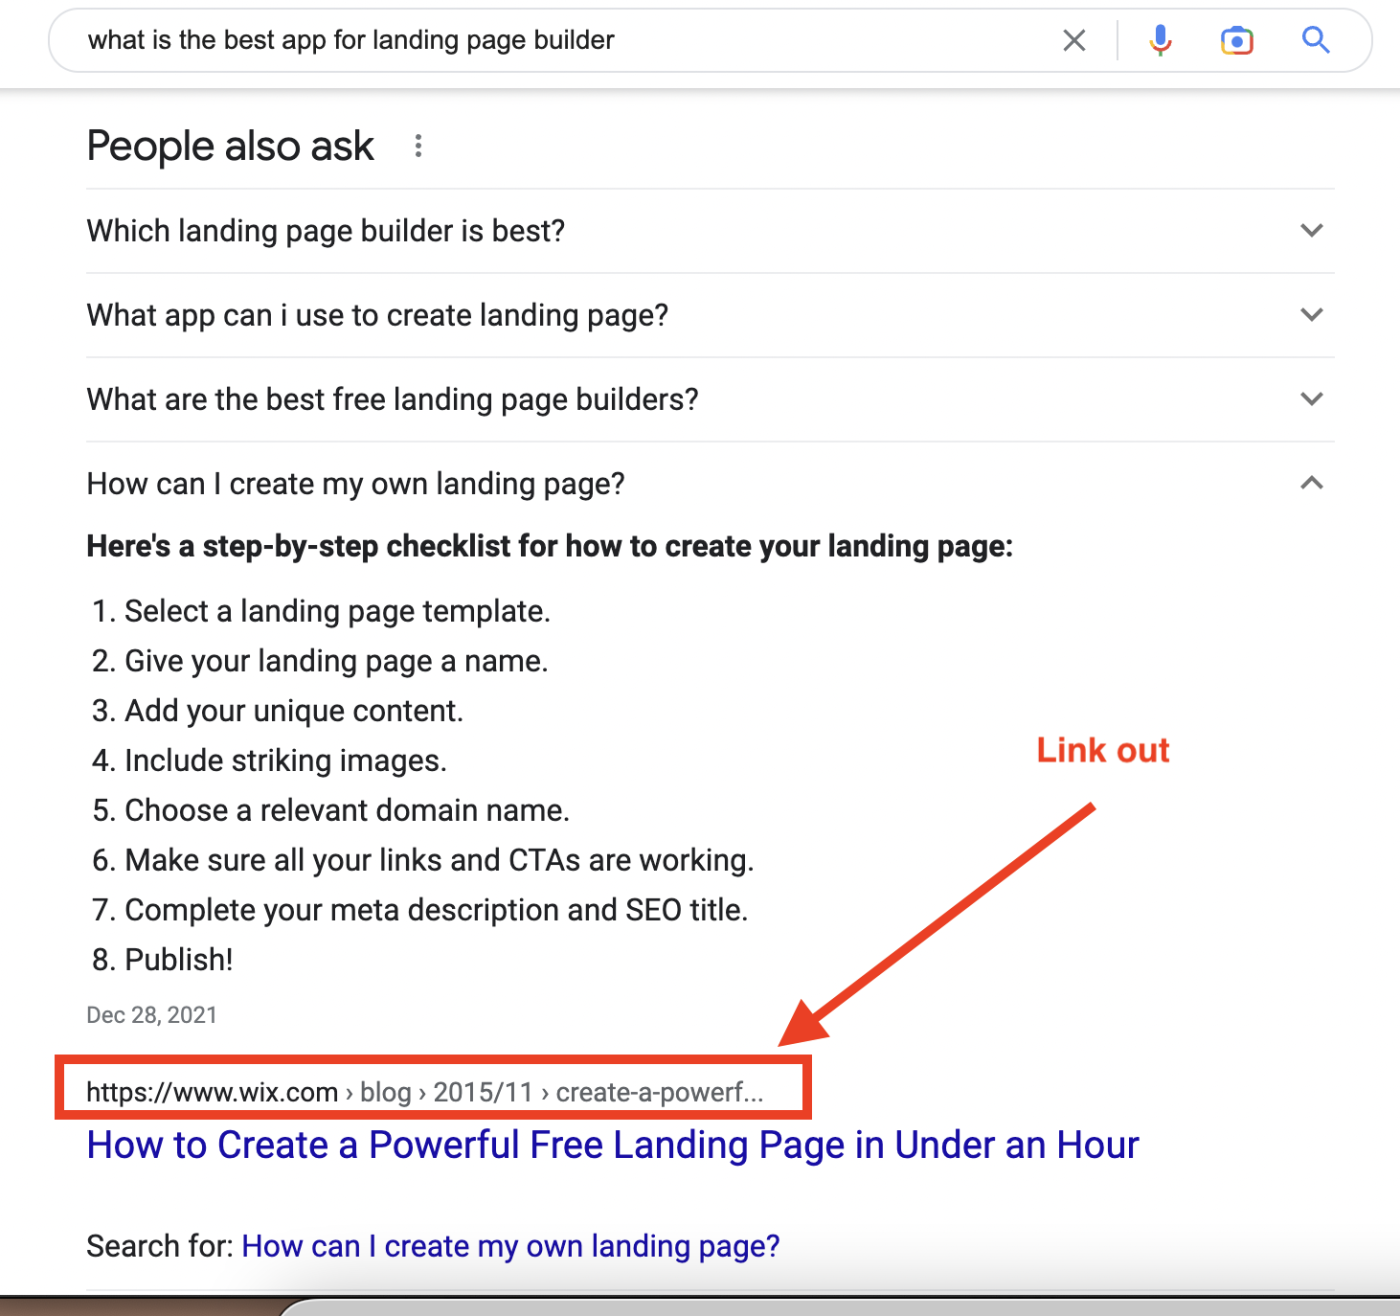 SERP for "what is the best app for landing page builder" (link out from PAA)